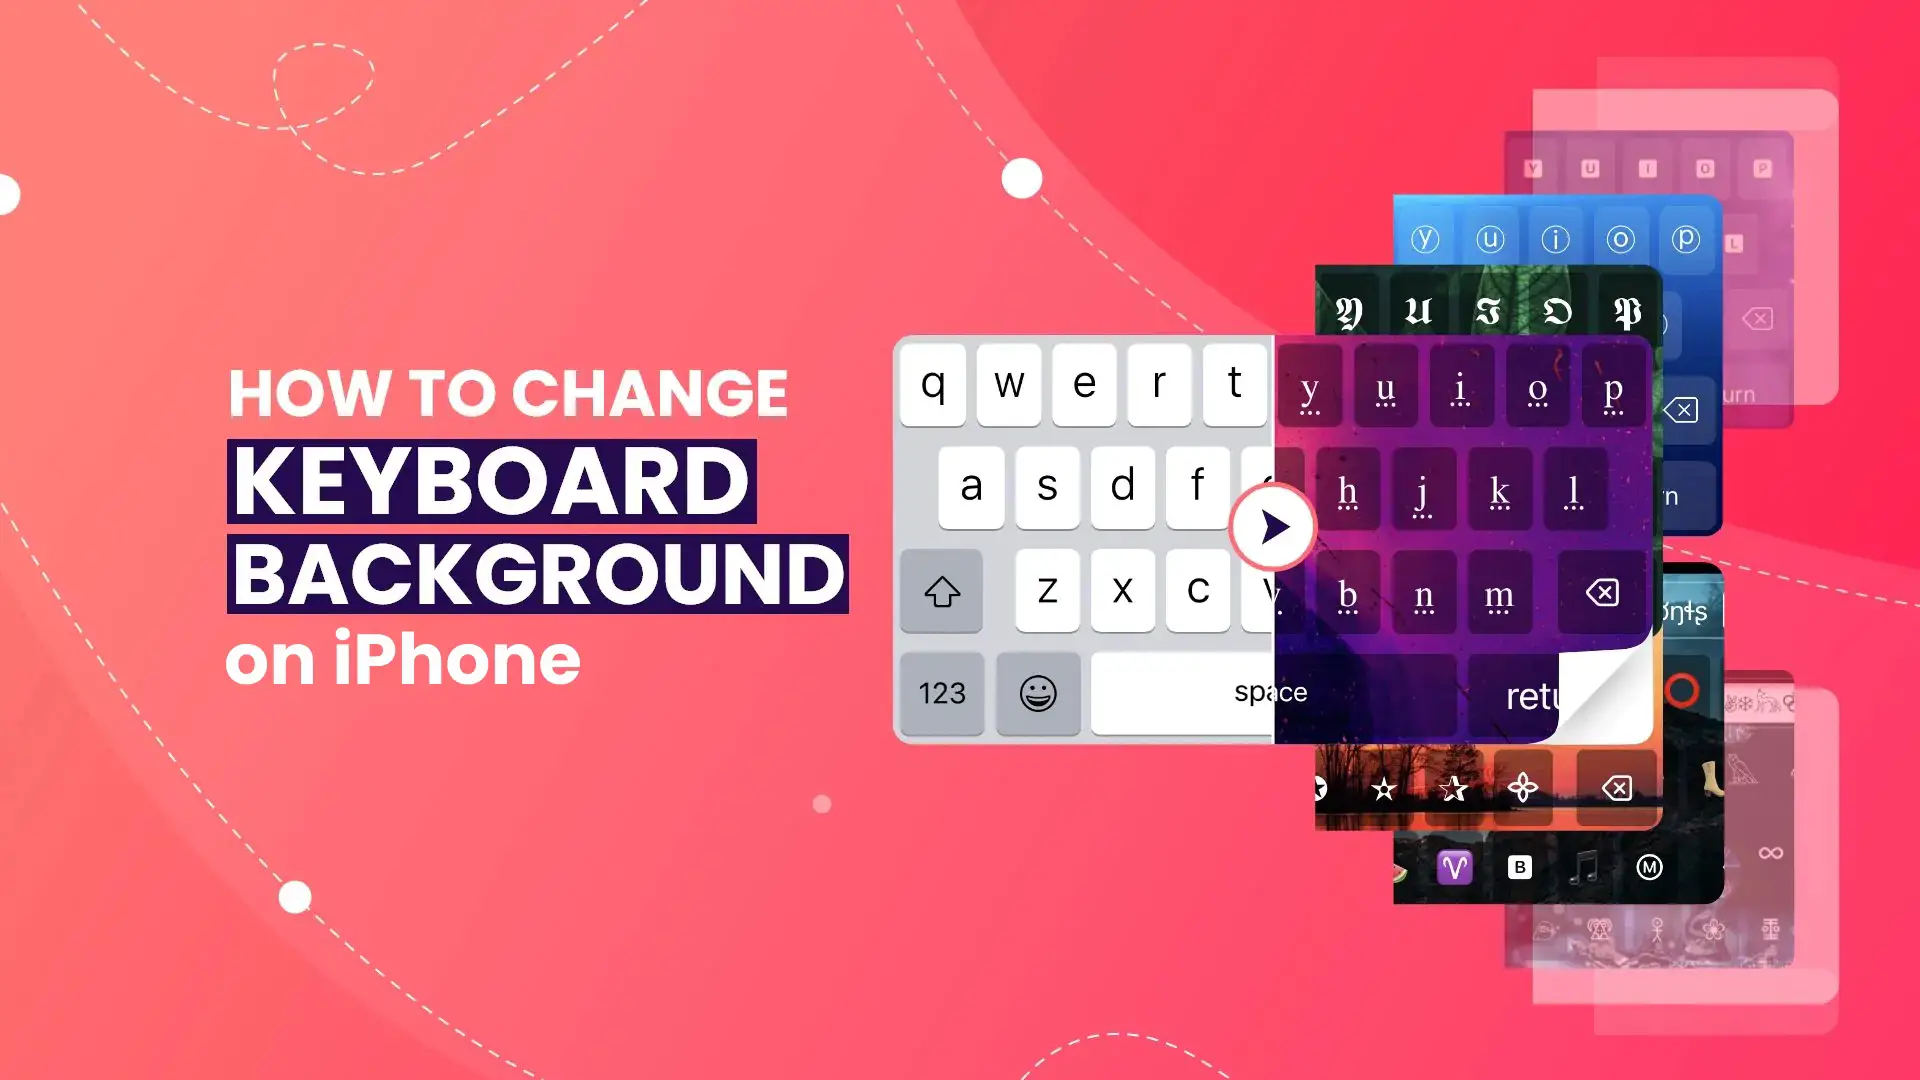 How to Change Keyboard Background on iPhone – A Detailed Guide